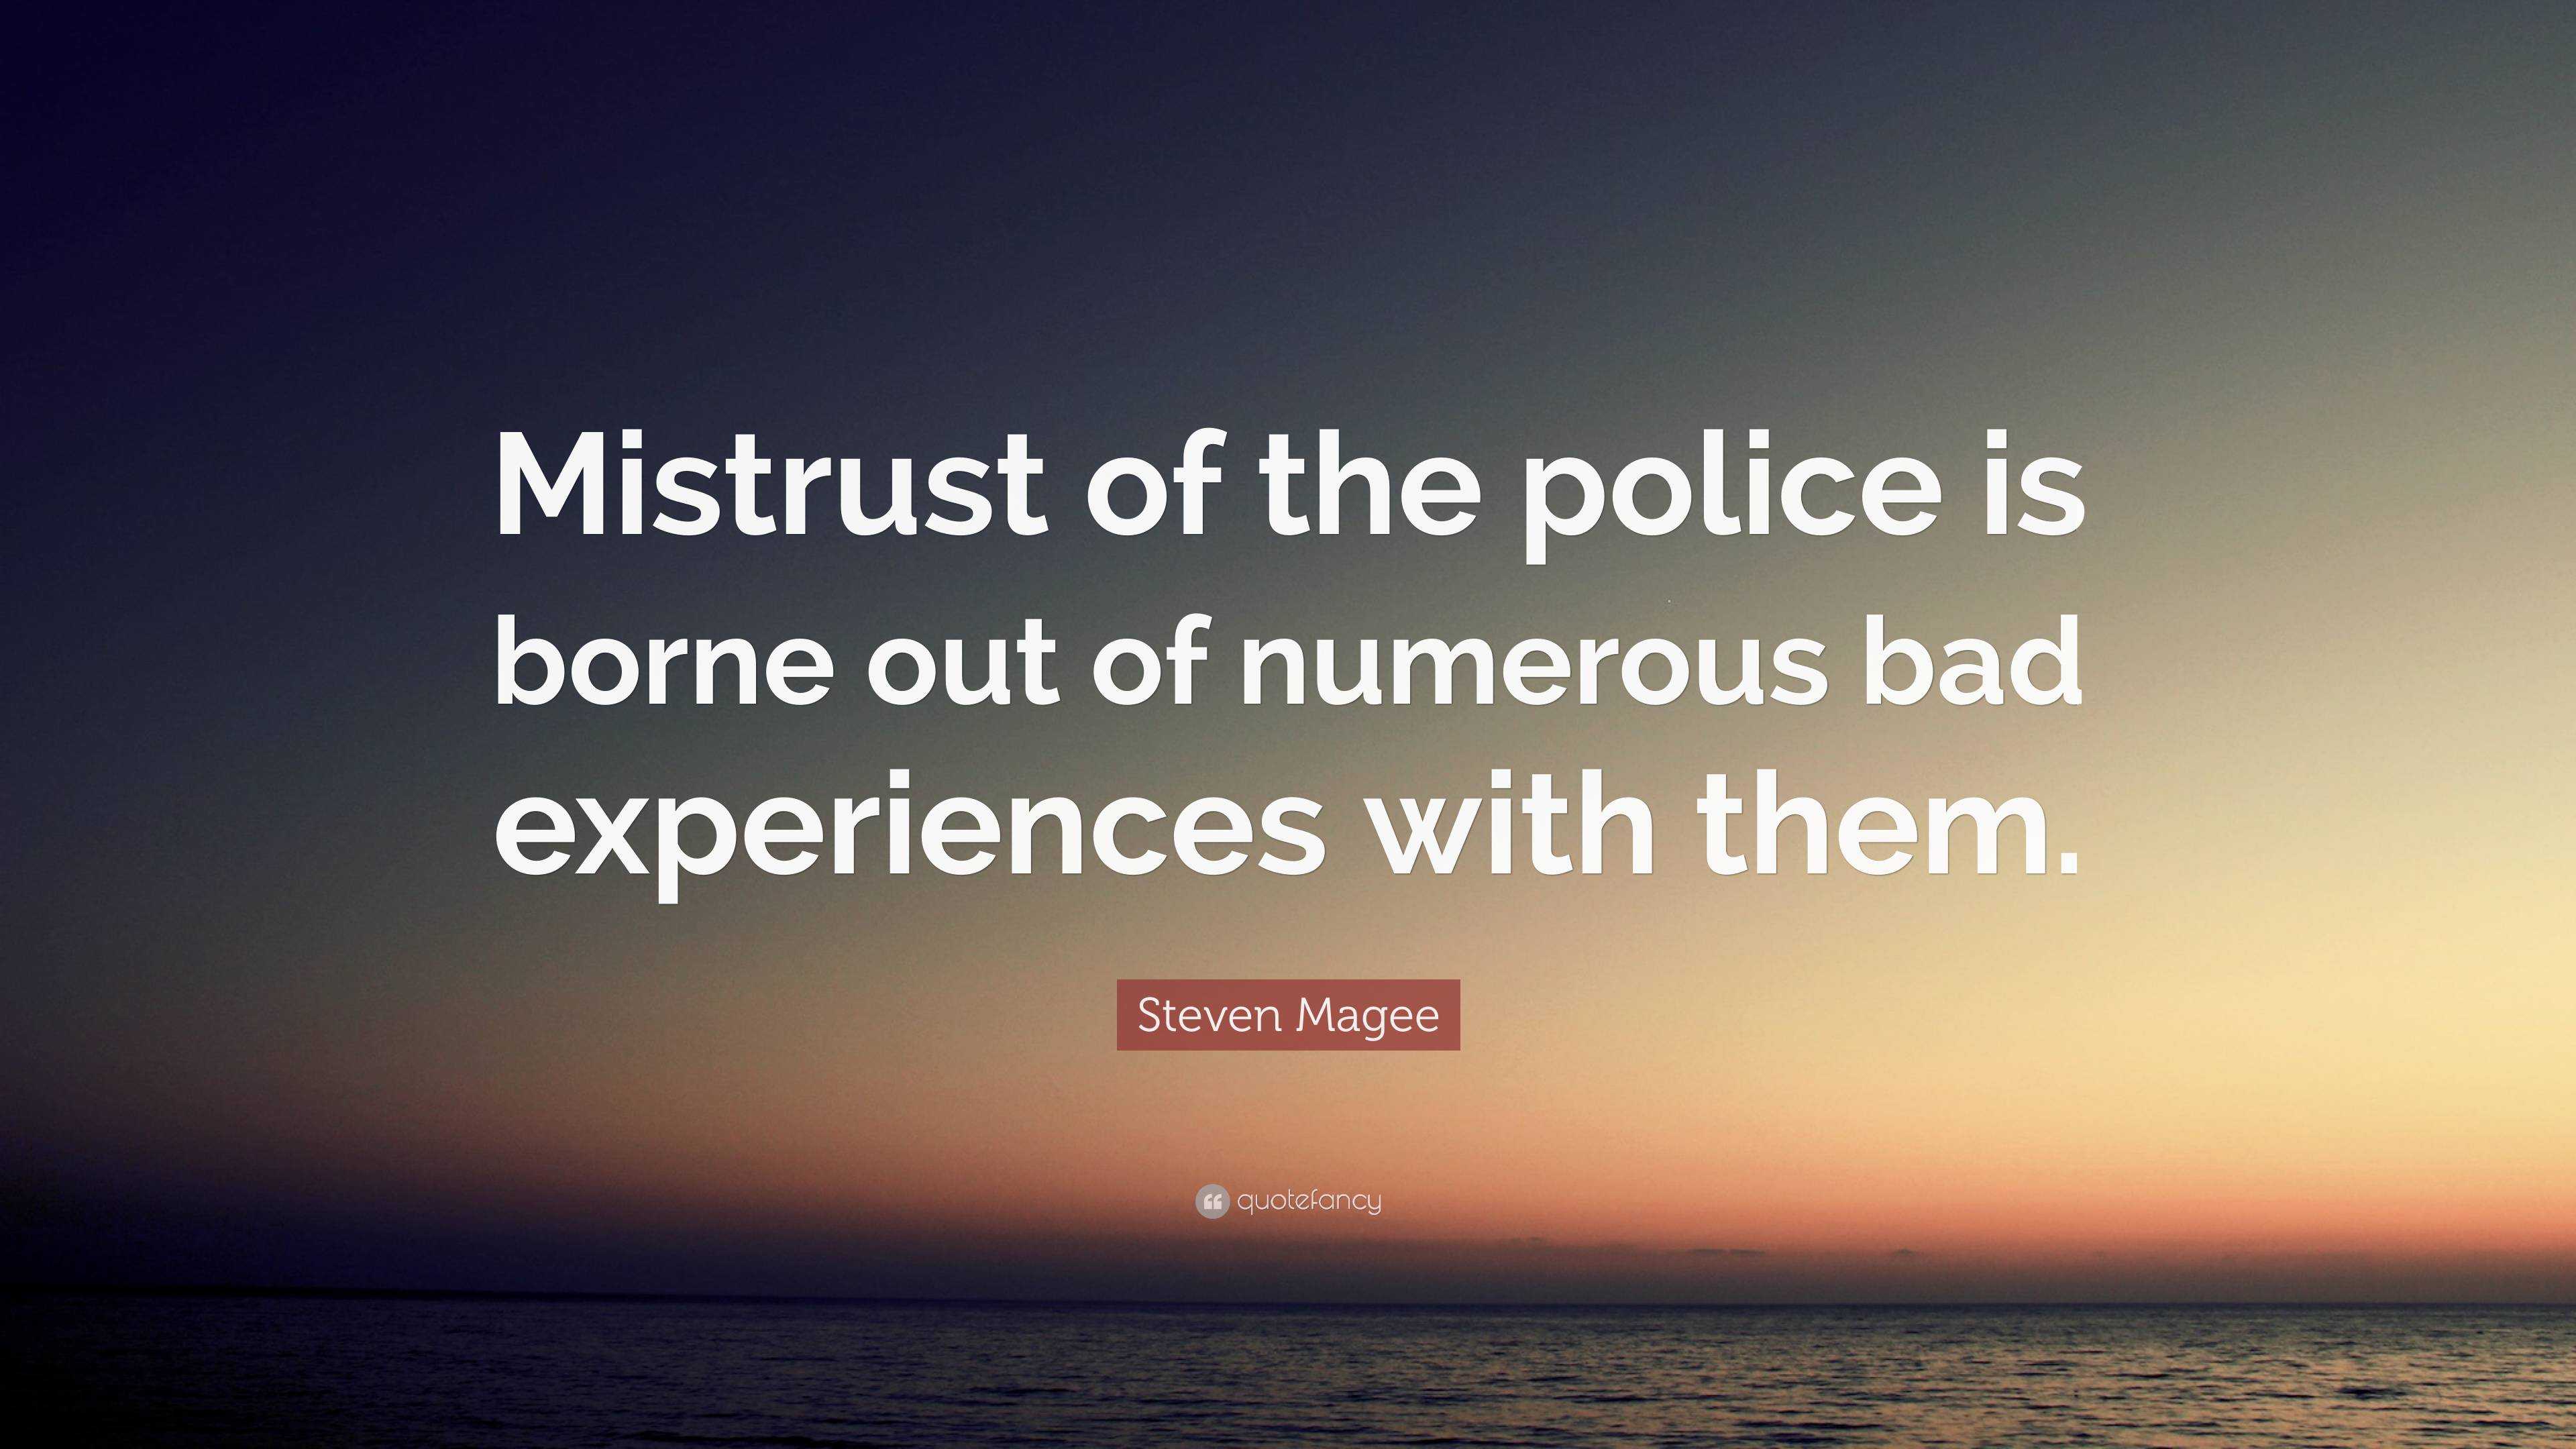 Steven Magee Quote: “Mistrust of the police is borne out of numerous ...